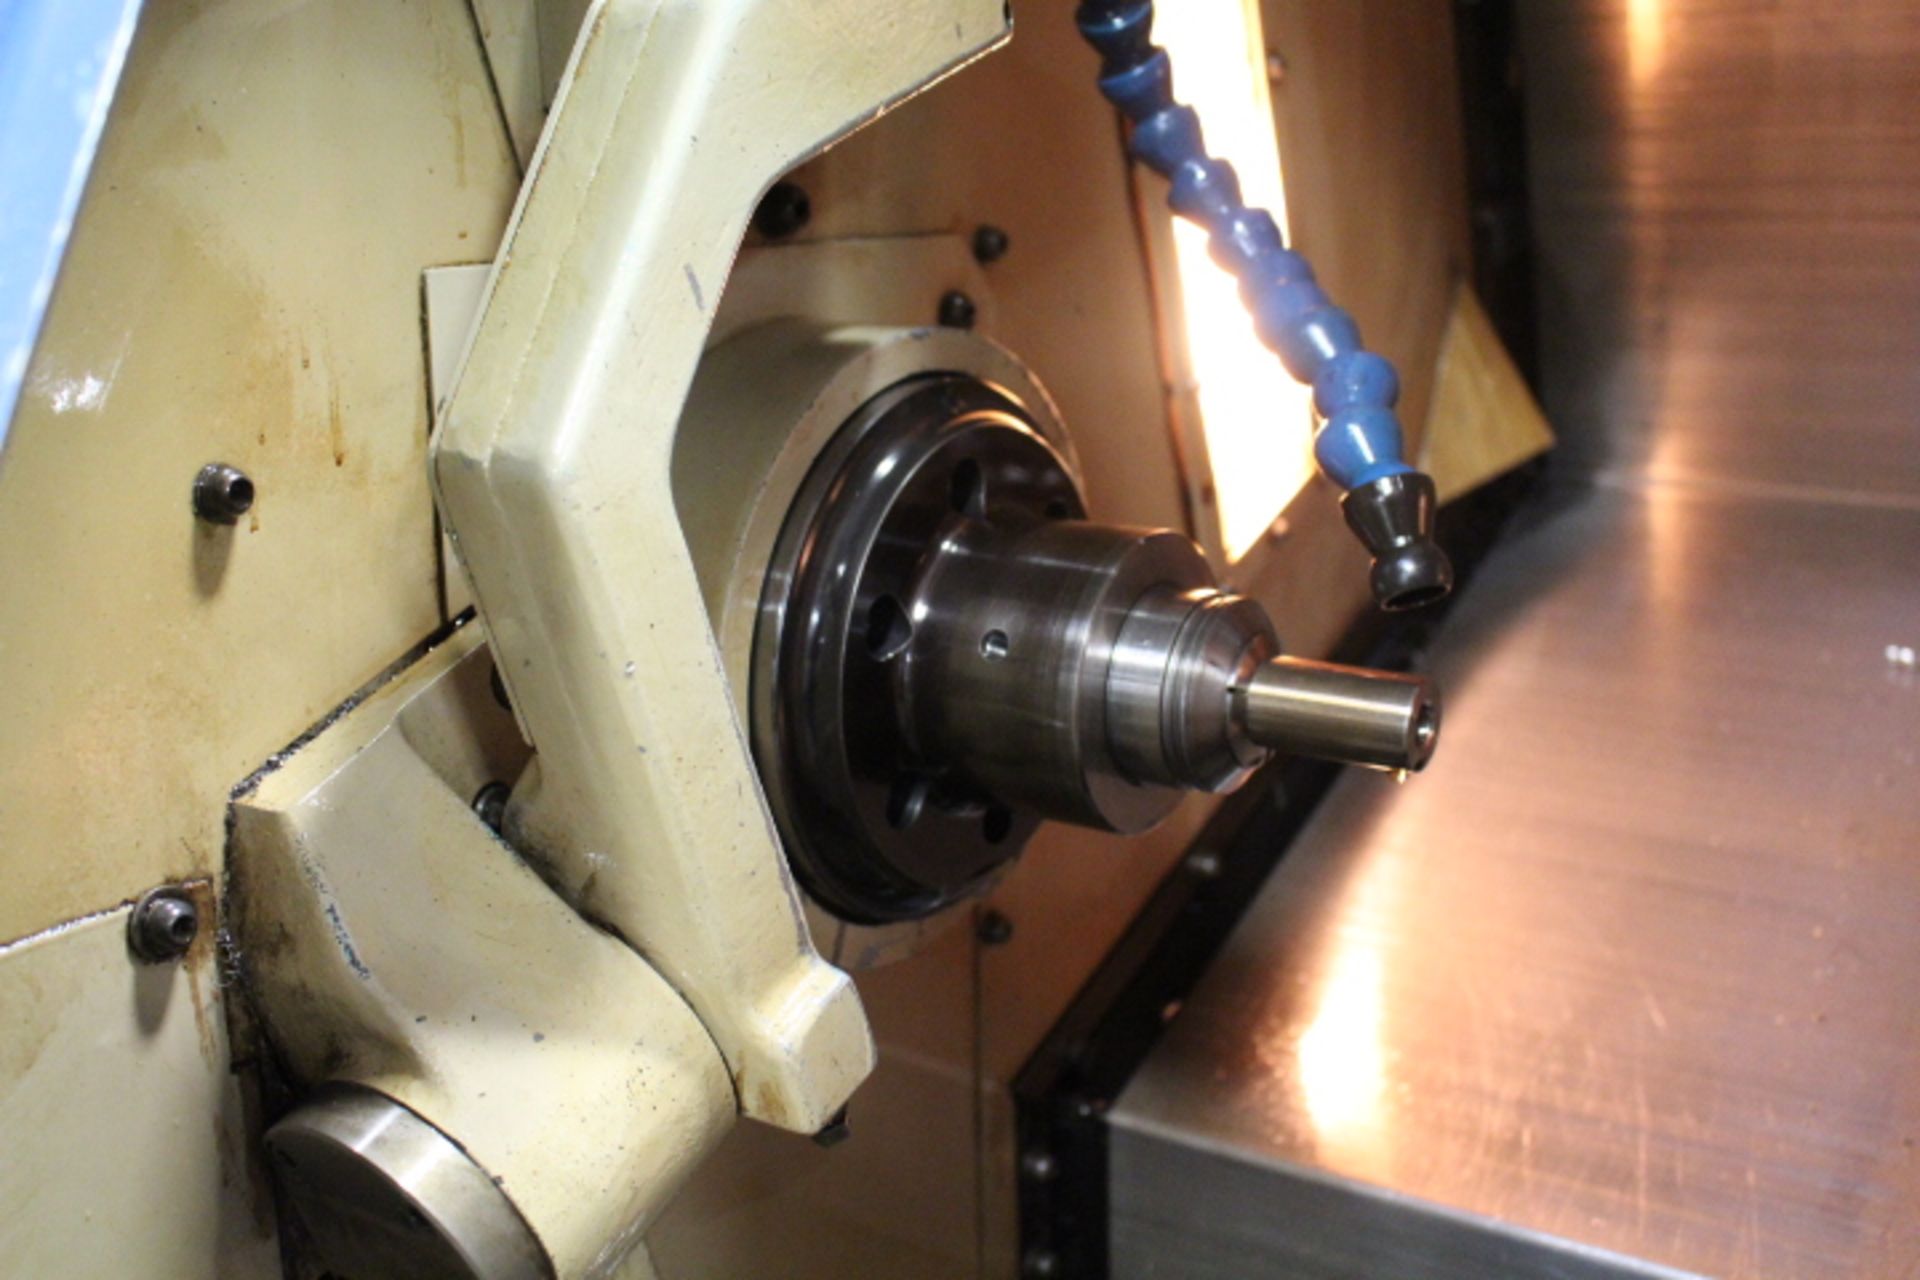 HITACHI SEIKI TS15 CNC MILL/TURNING CENTER, FULL C AXIS, LIVE TOOLS, 6,000 RPM, 12 STATION TURRET, - Image 3 of 5